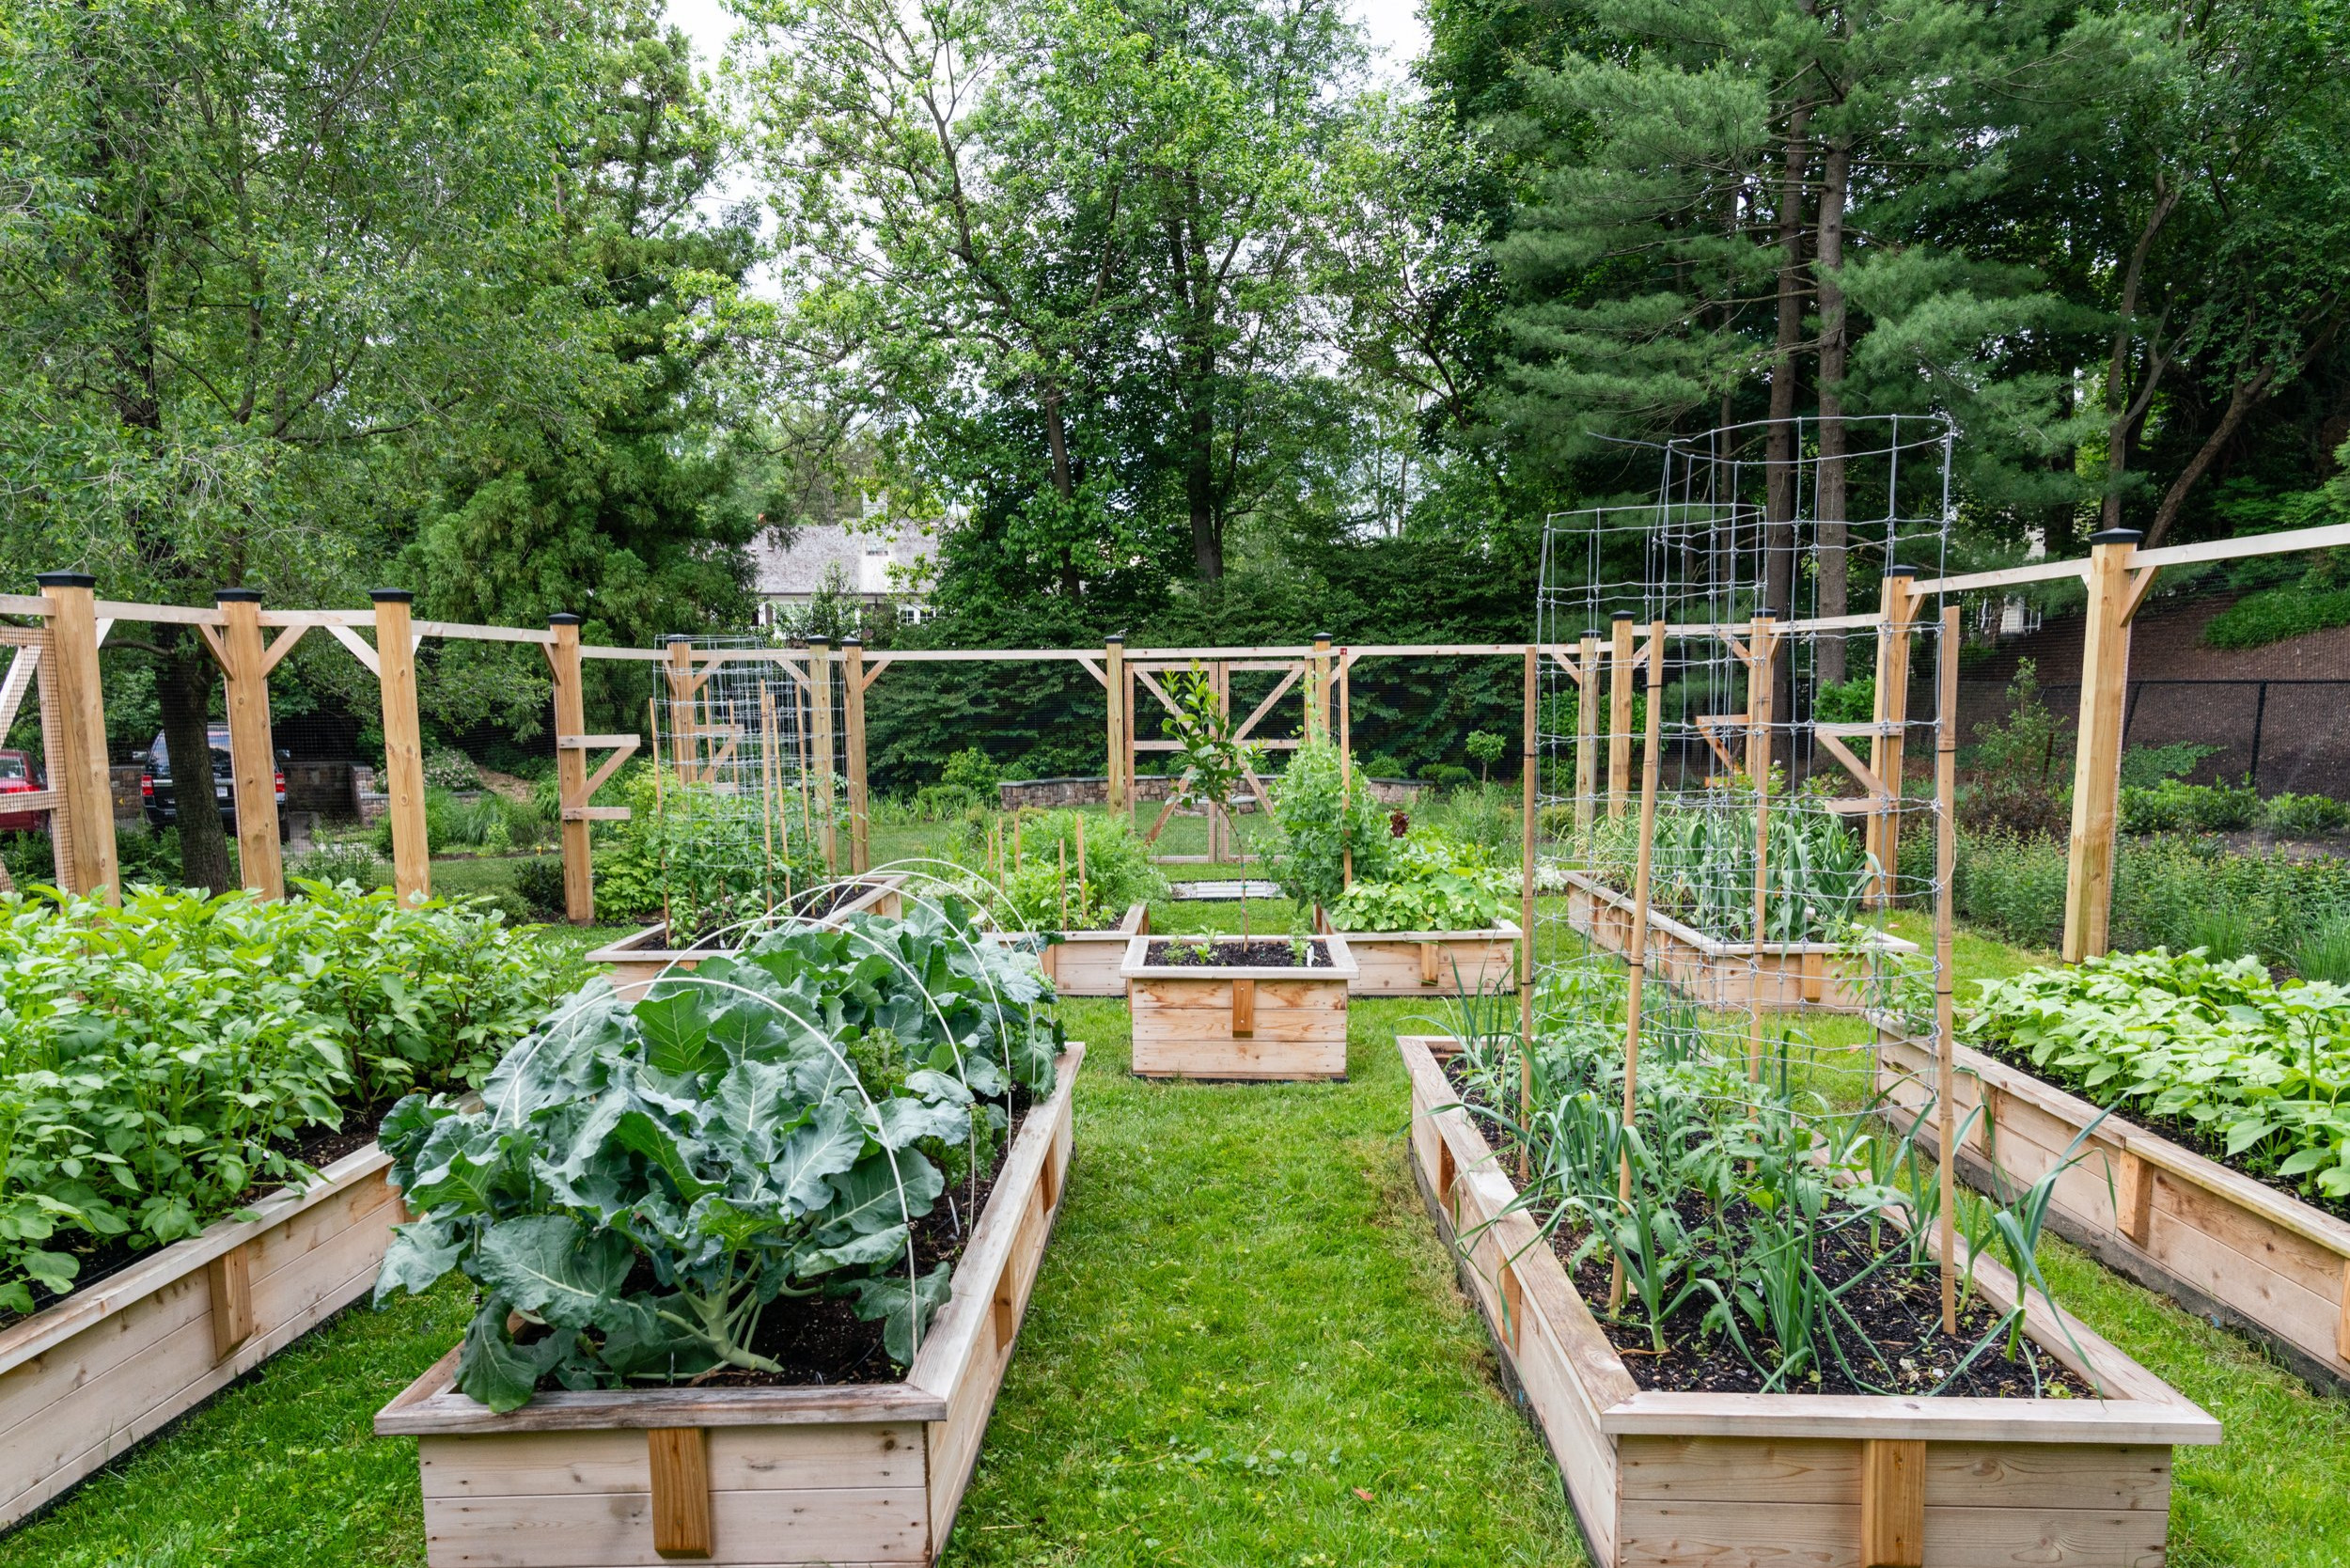 Raised Vegetable Garden System by Peter Atkins and Associates